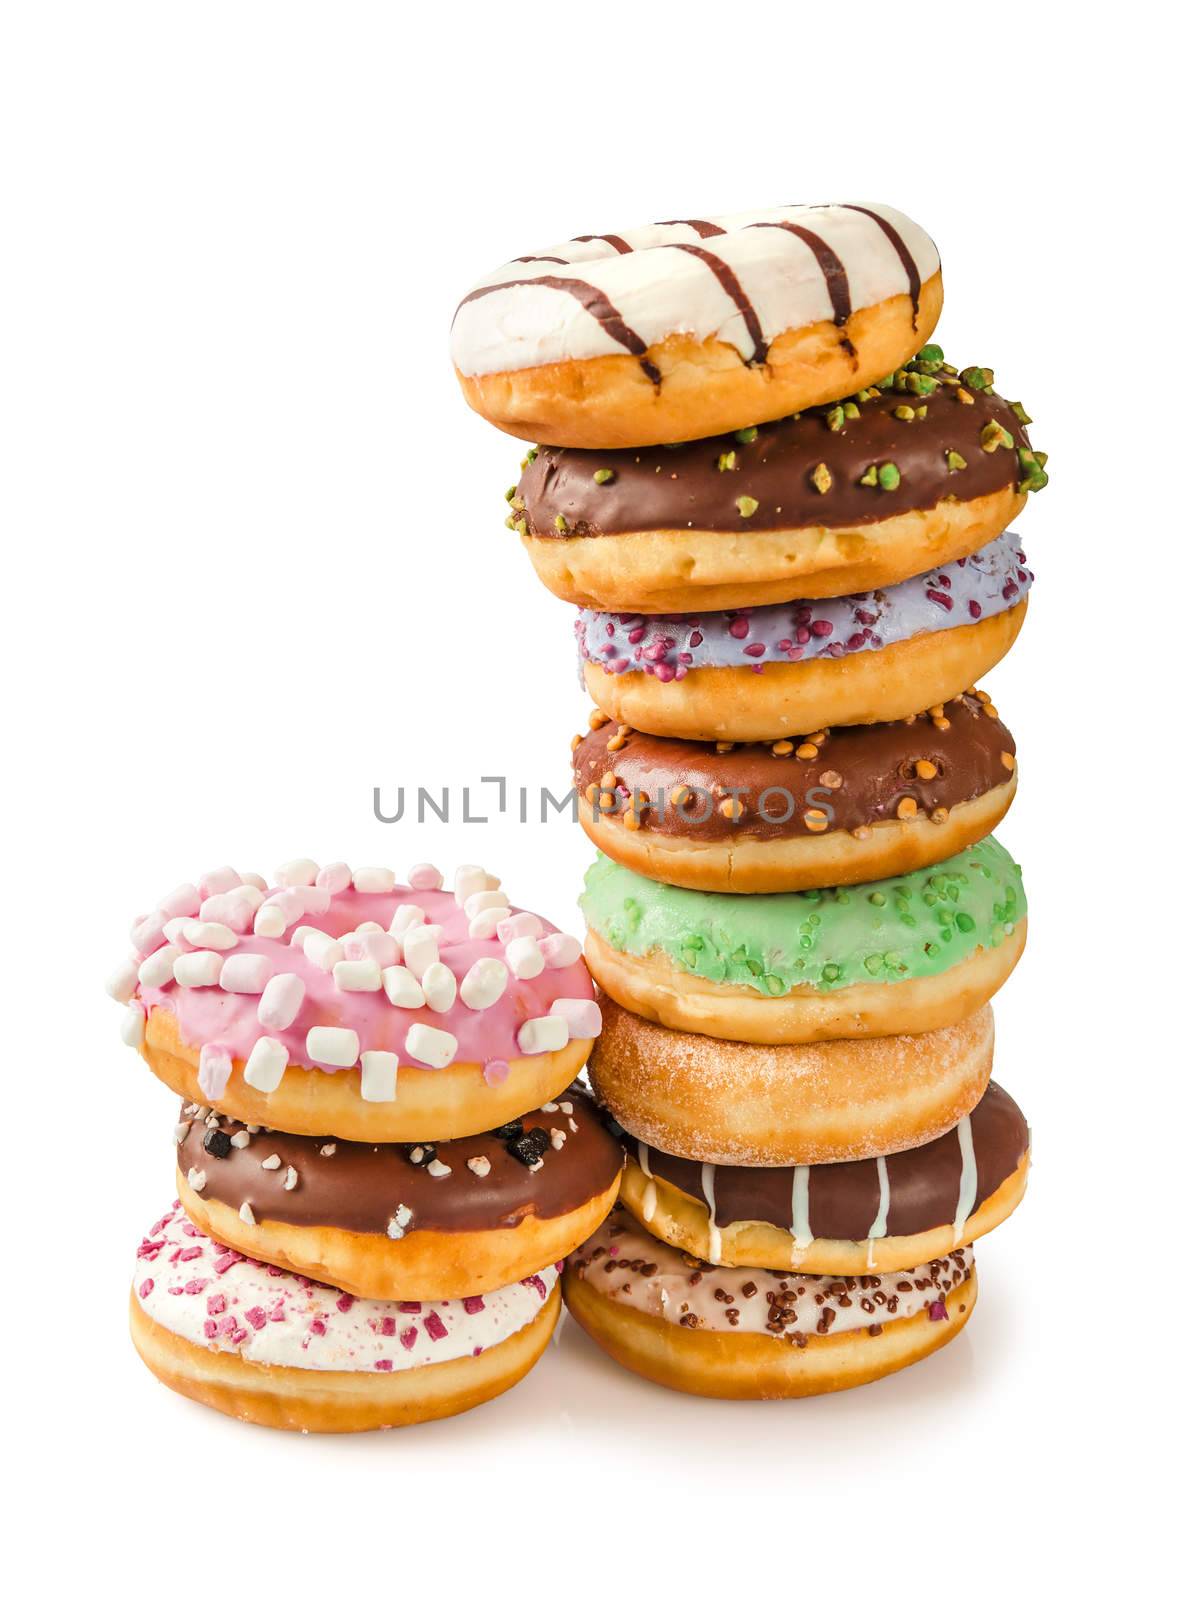 Stack of donuts by sumners